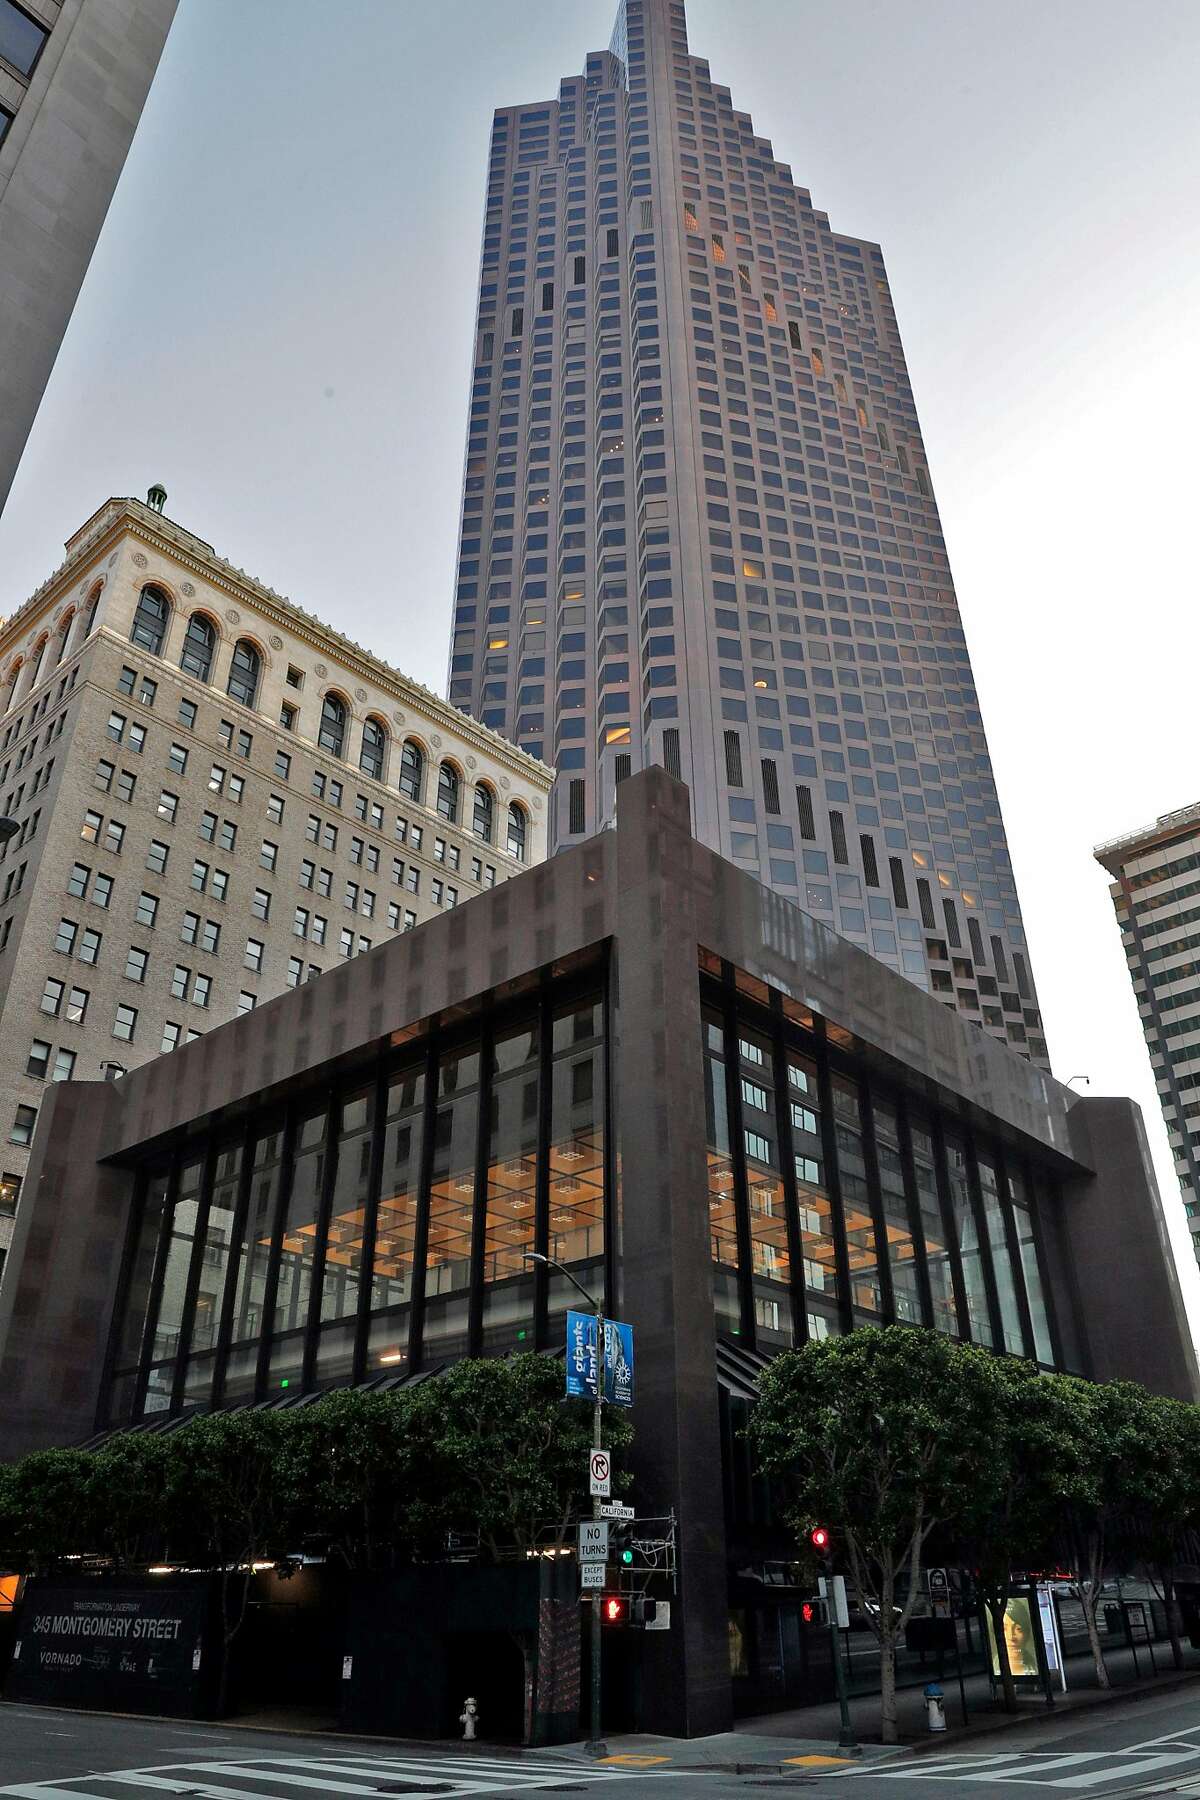 The exterior of 345 Montgomery with 555 California Street visible in the background in San Francisco, Calif., on Wednesday, May 6, 2020. Co-working giant Regus has walked away from a 15-year lease worth $90 million at 345 Montgomery St., the former bank of America banking hall co-owned by Vornado and the Trump Organization which also owns 555 California Street.